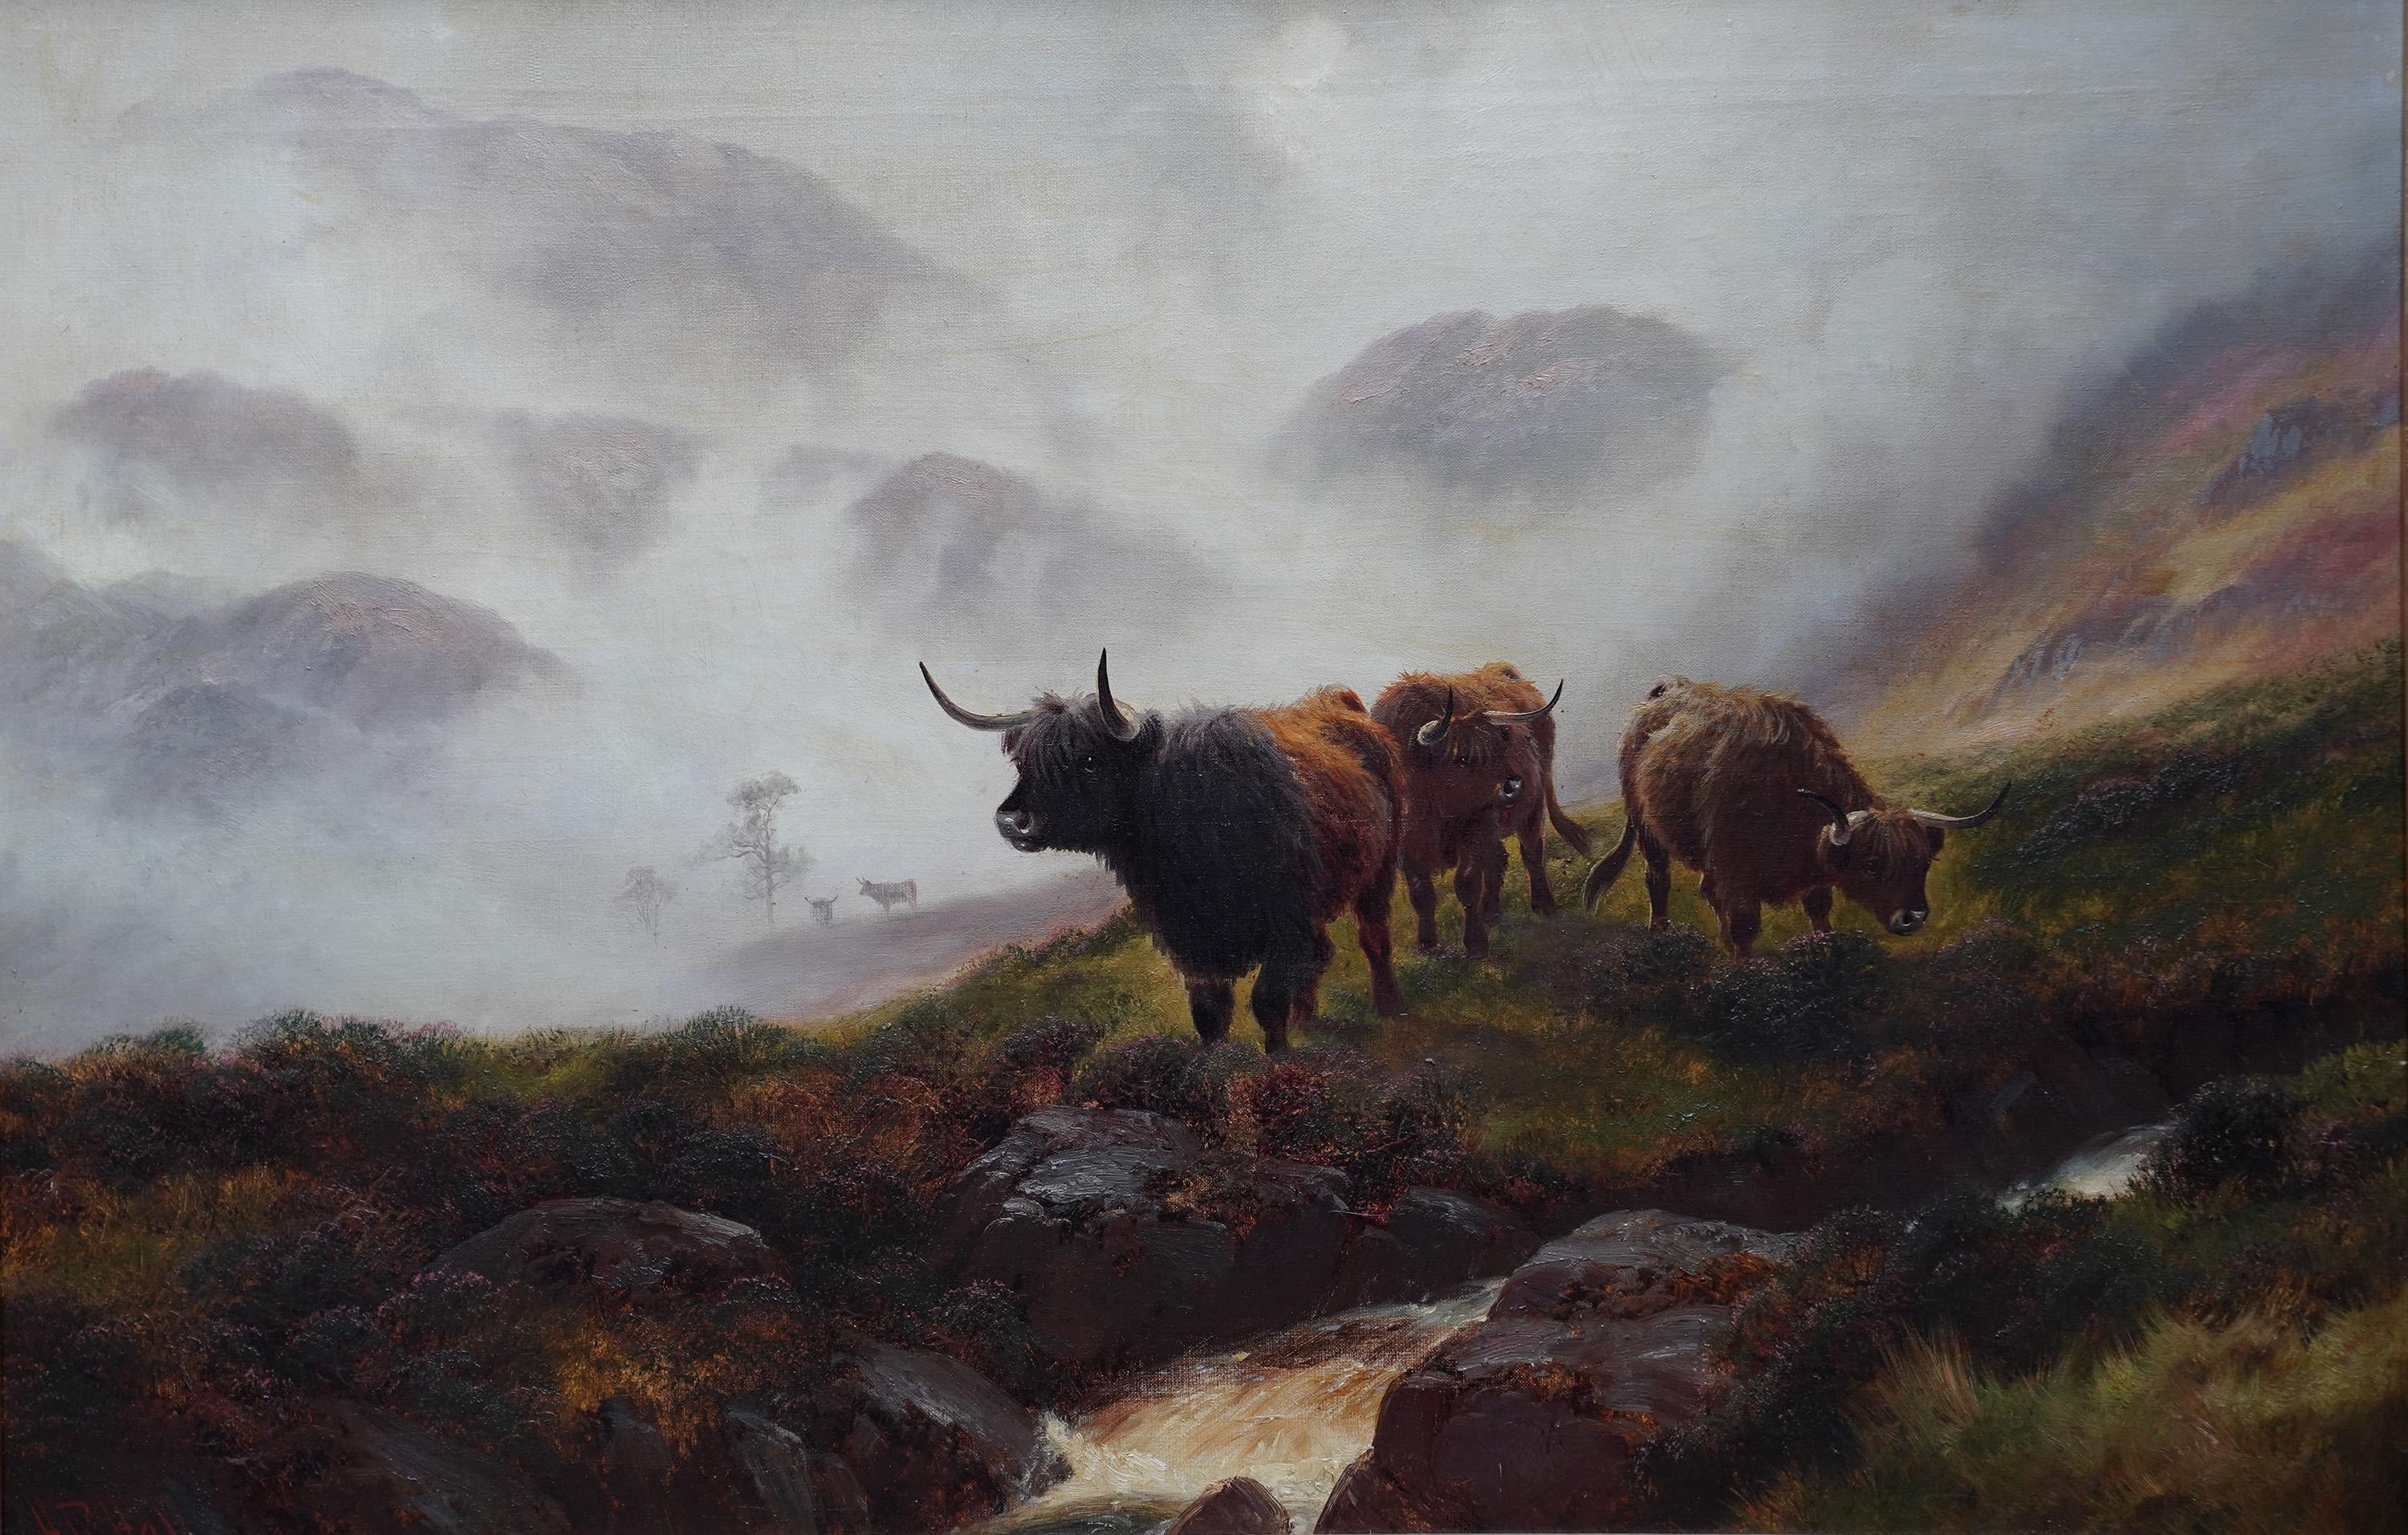 Ben Lomond Scotland Cattle in Mist - British 19thC art landscape oil painting - Painting by Henry Robinson Hall